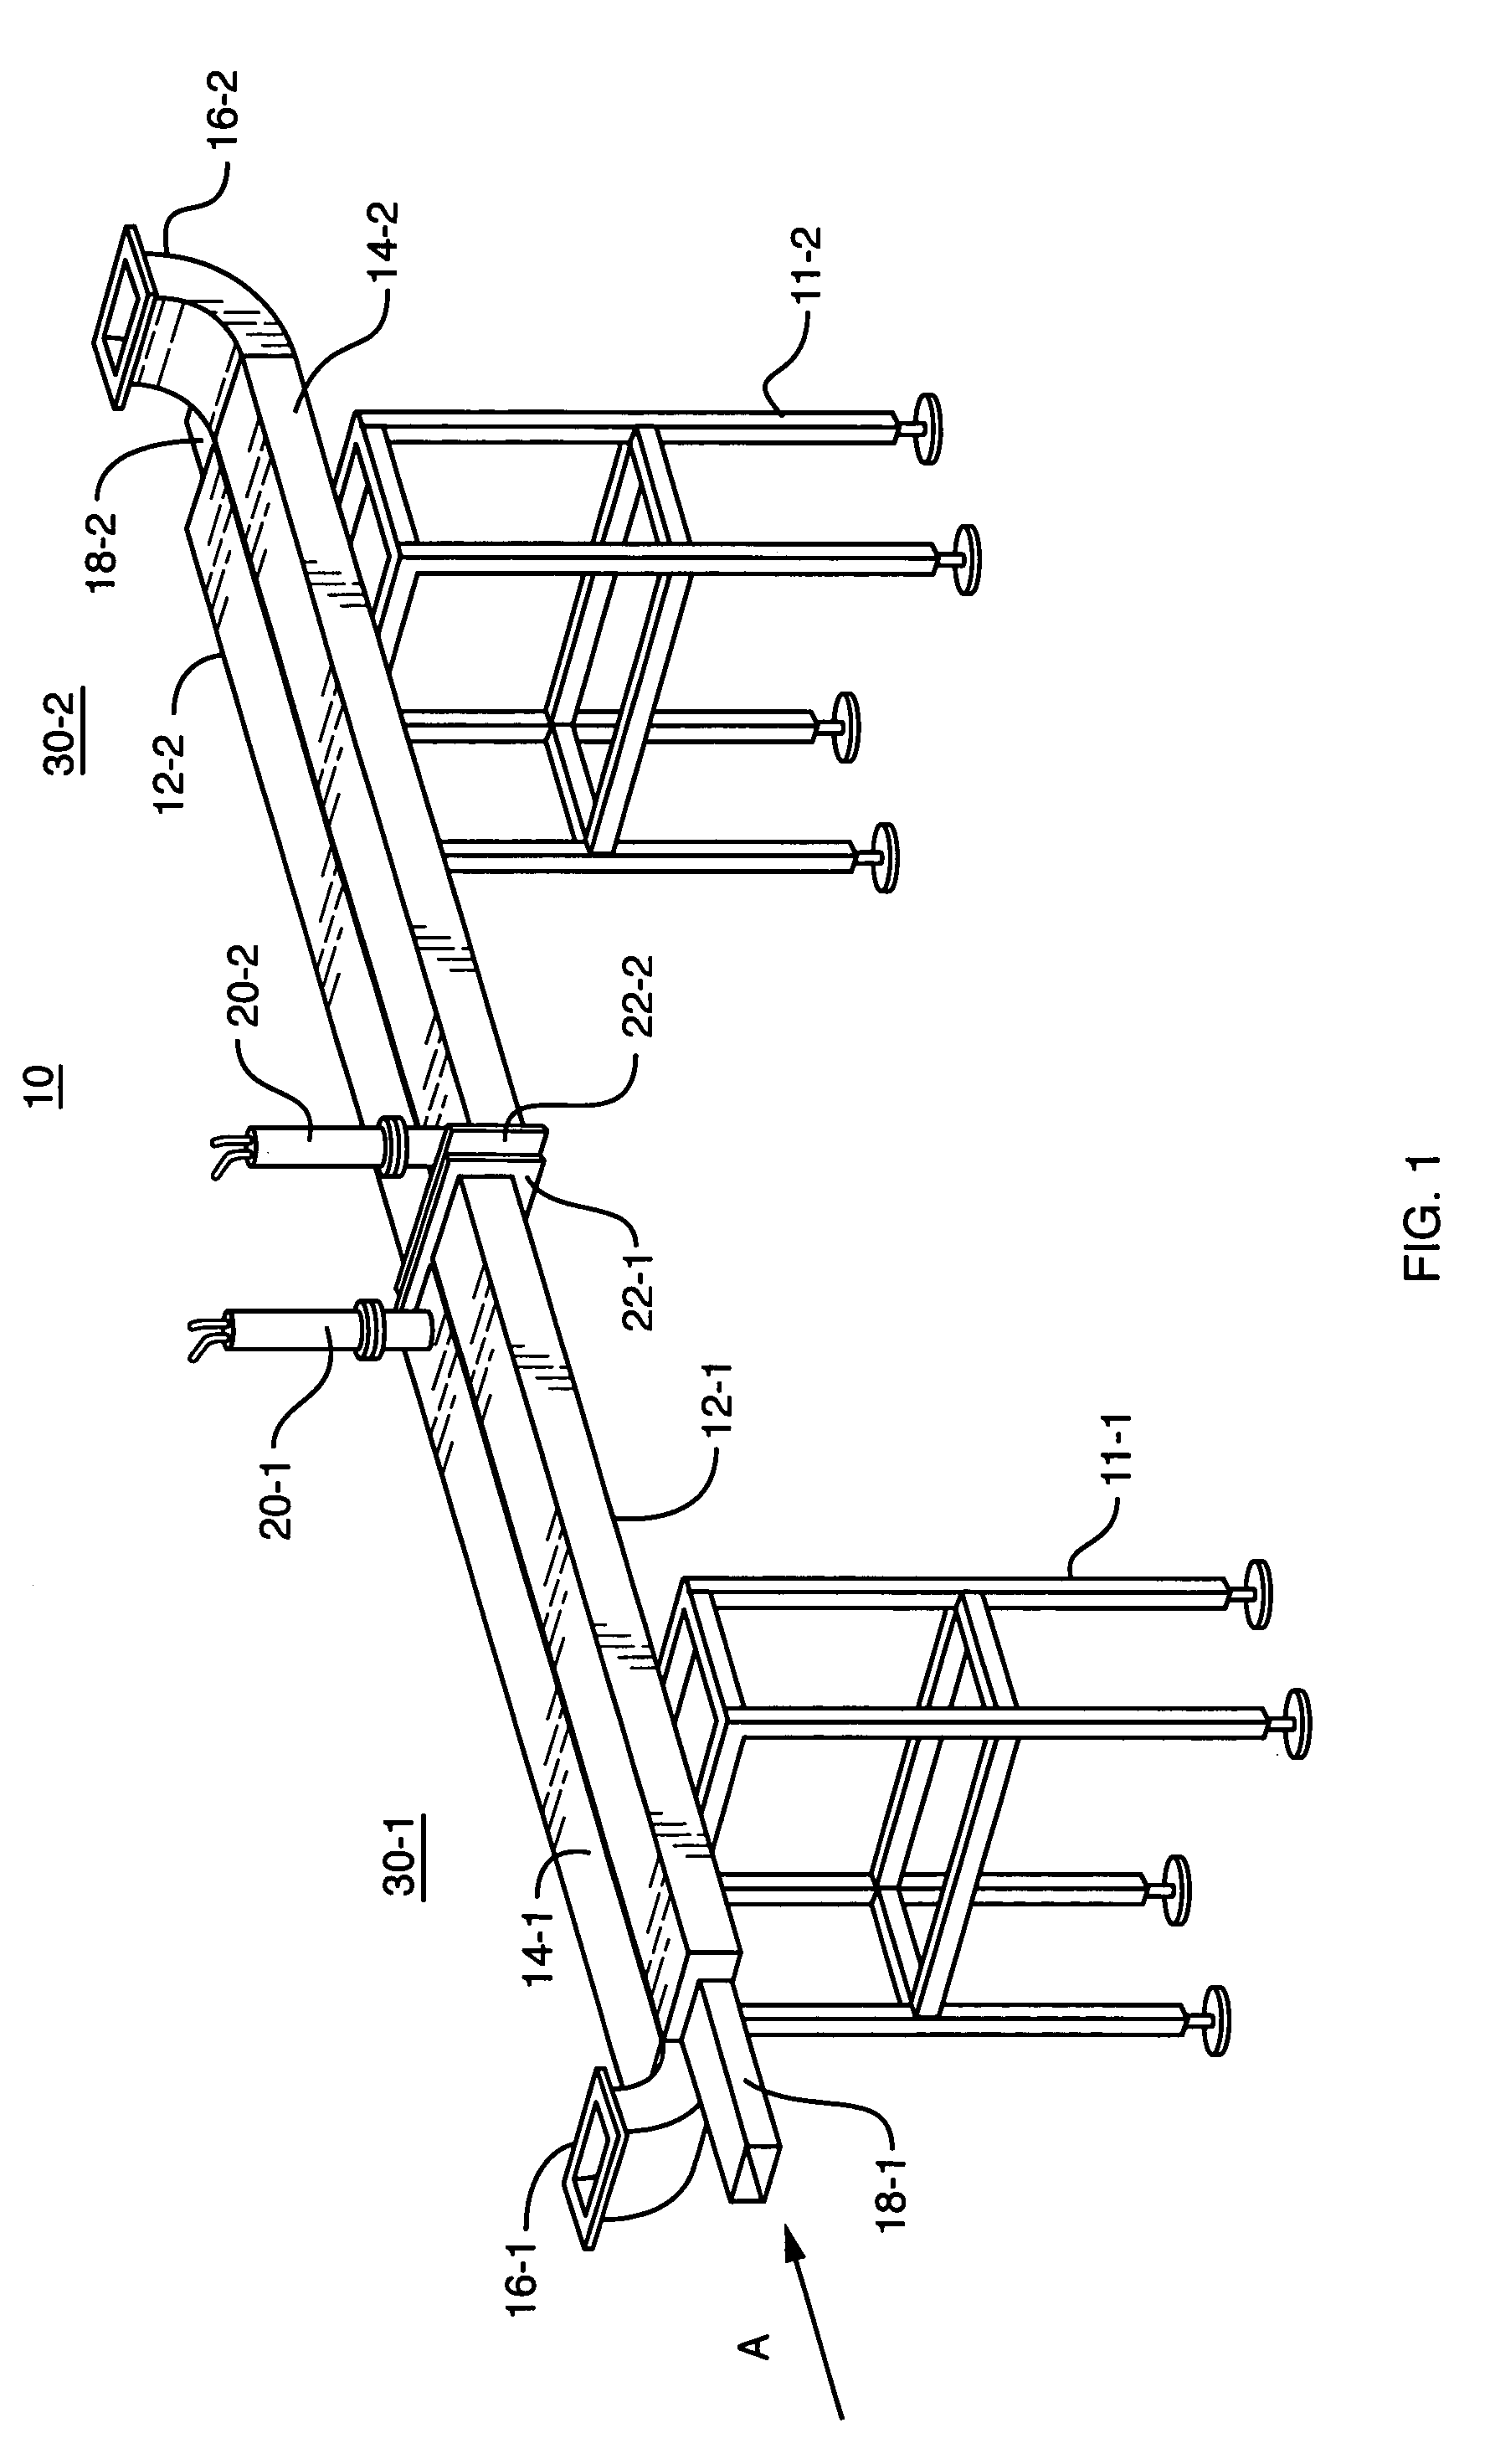 Coupled-waveguide microwave applicator for uniform processing